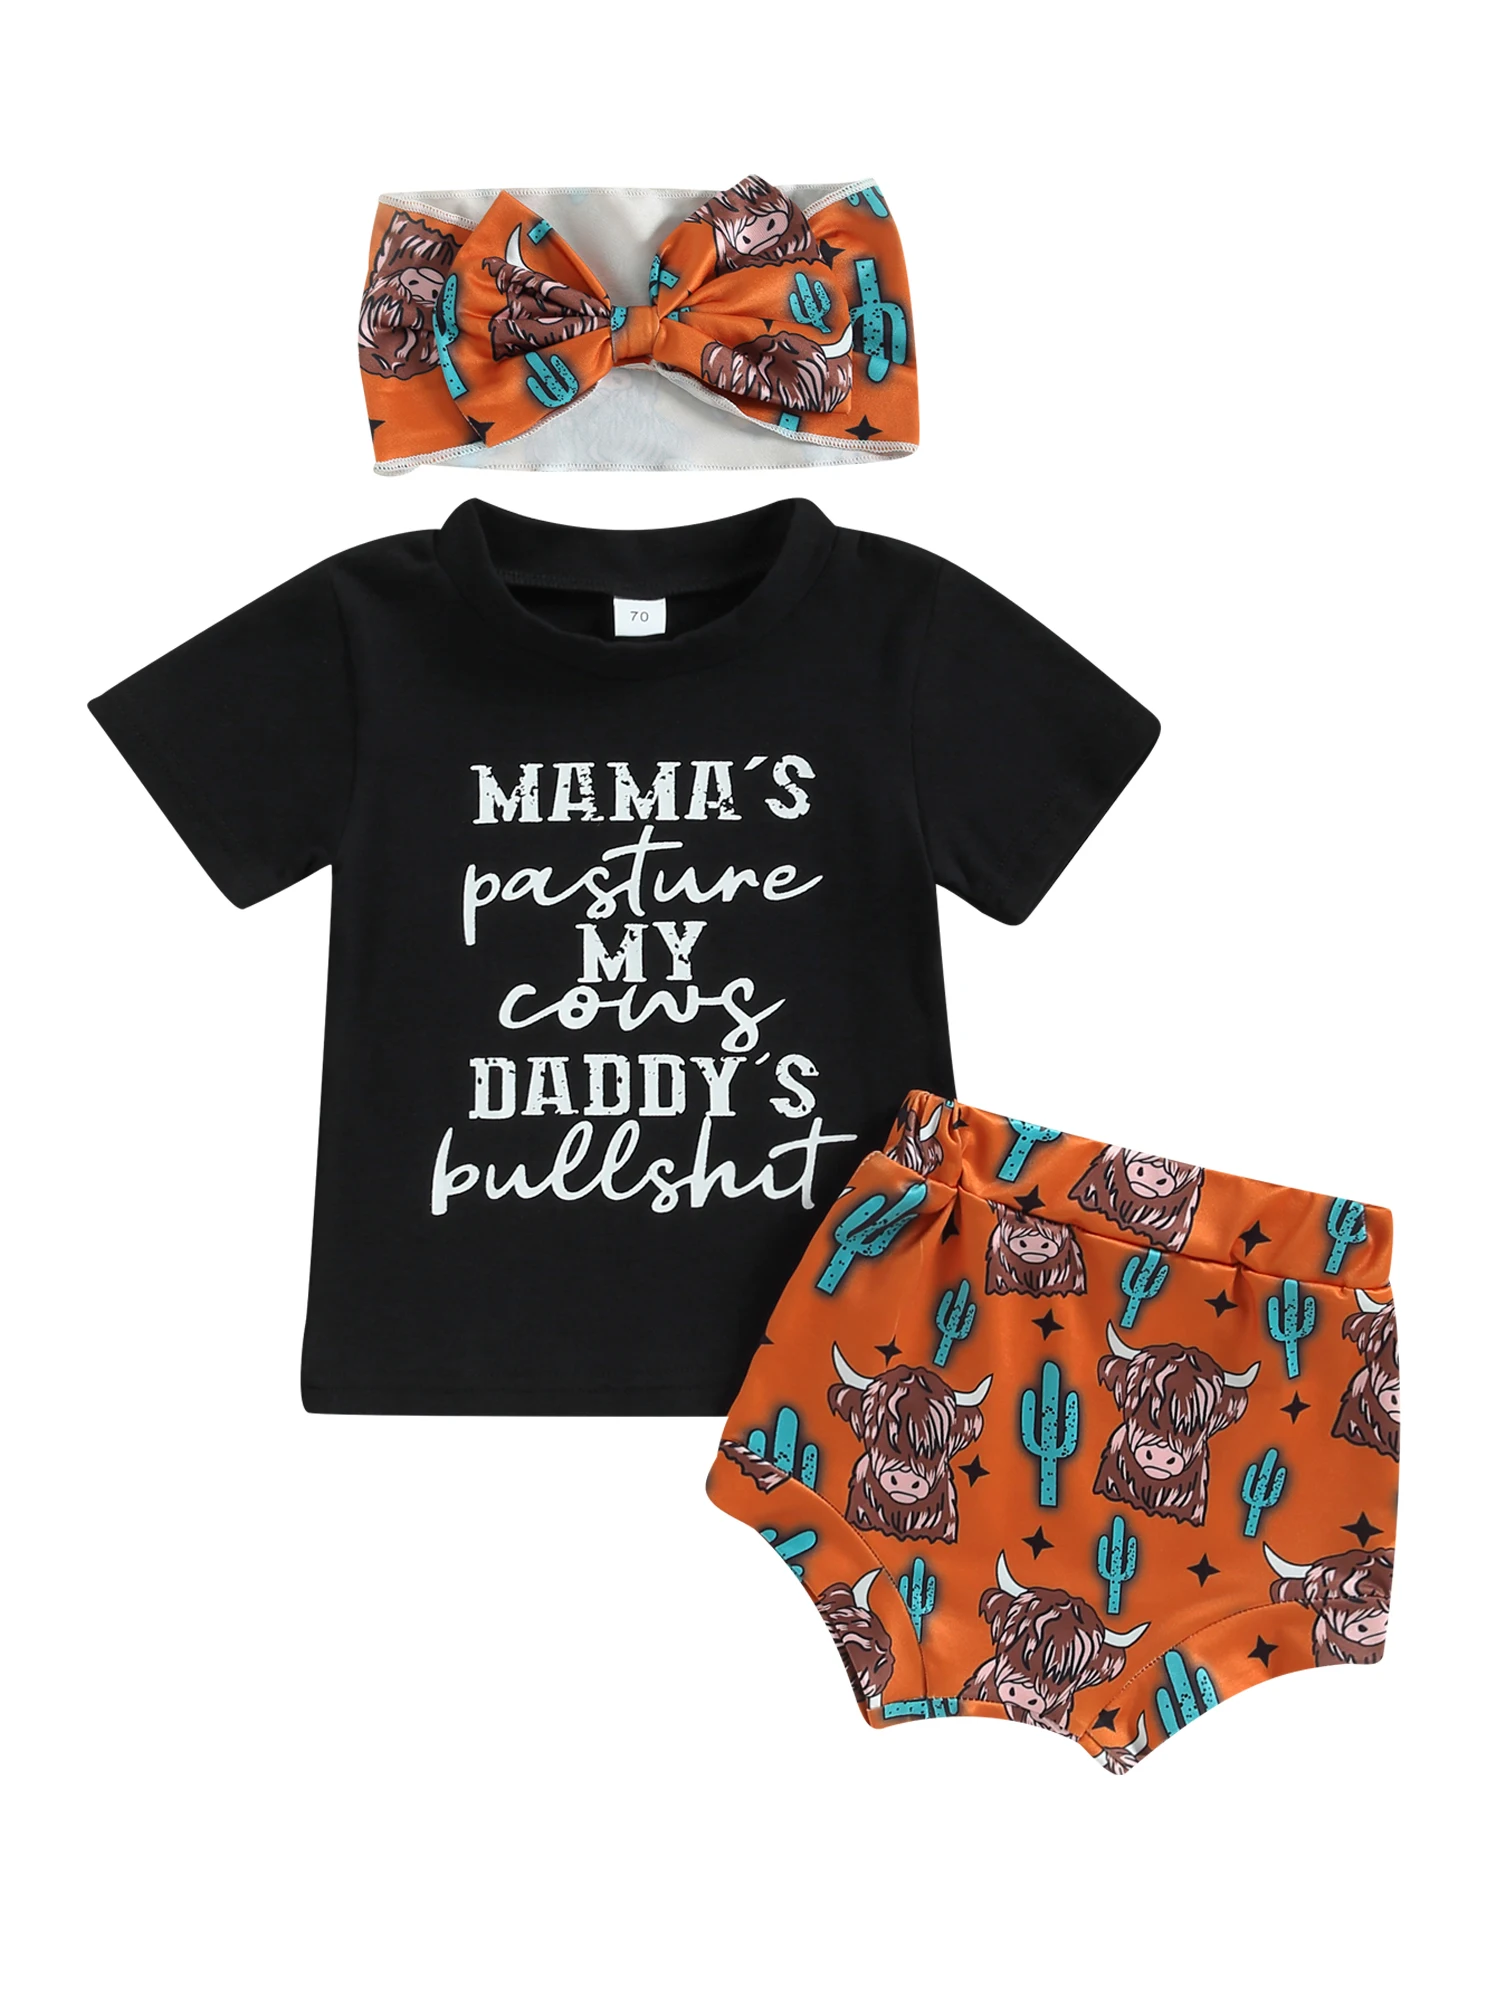 

Weatern Baby Girl Clothing Sets Letters Print Short Sleeve T-shirt and Cattle Print Shorts with Bowknot Headband